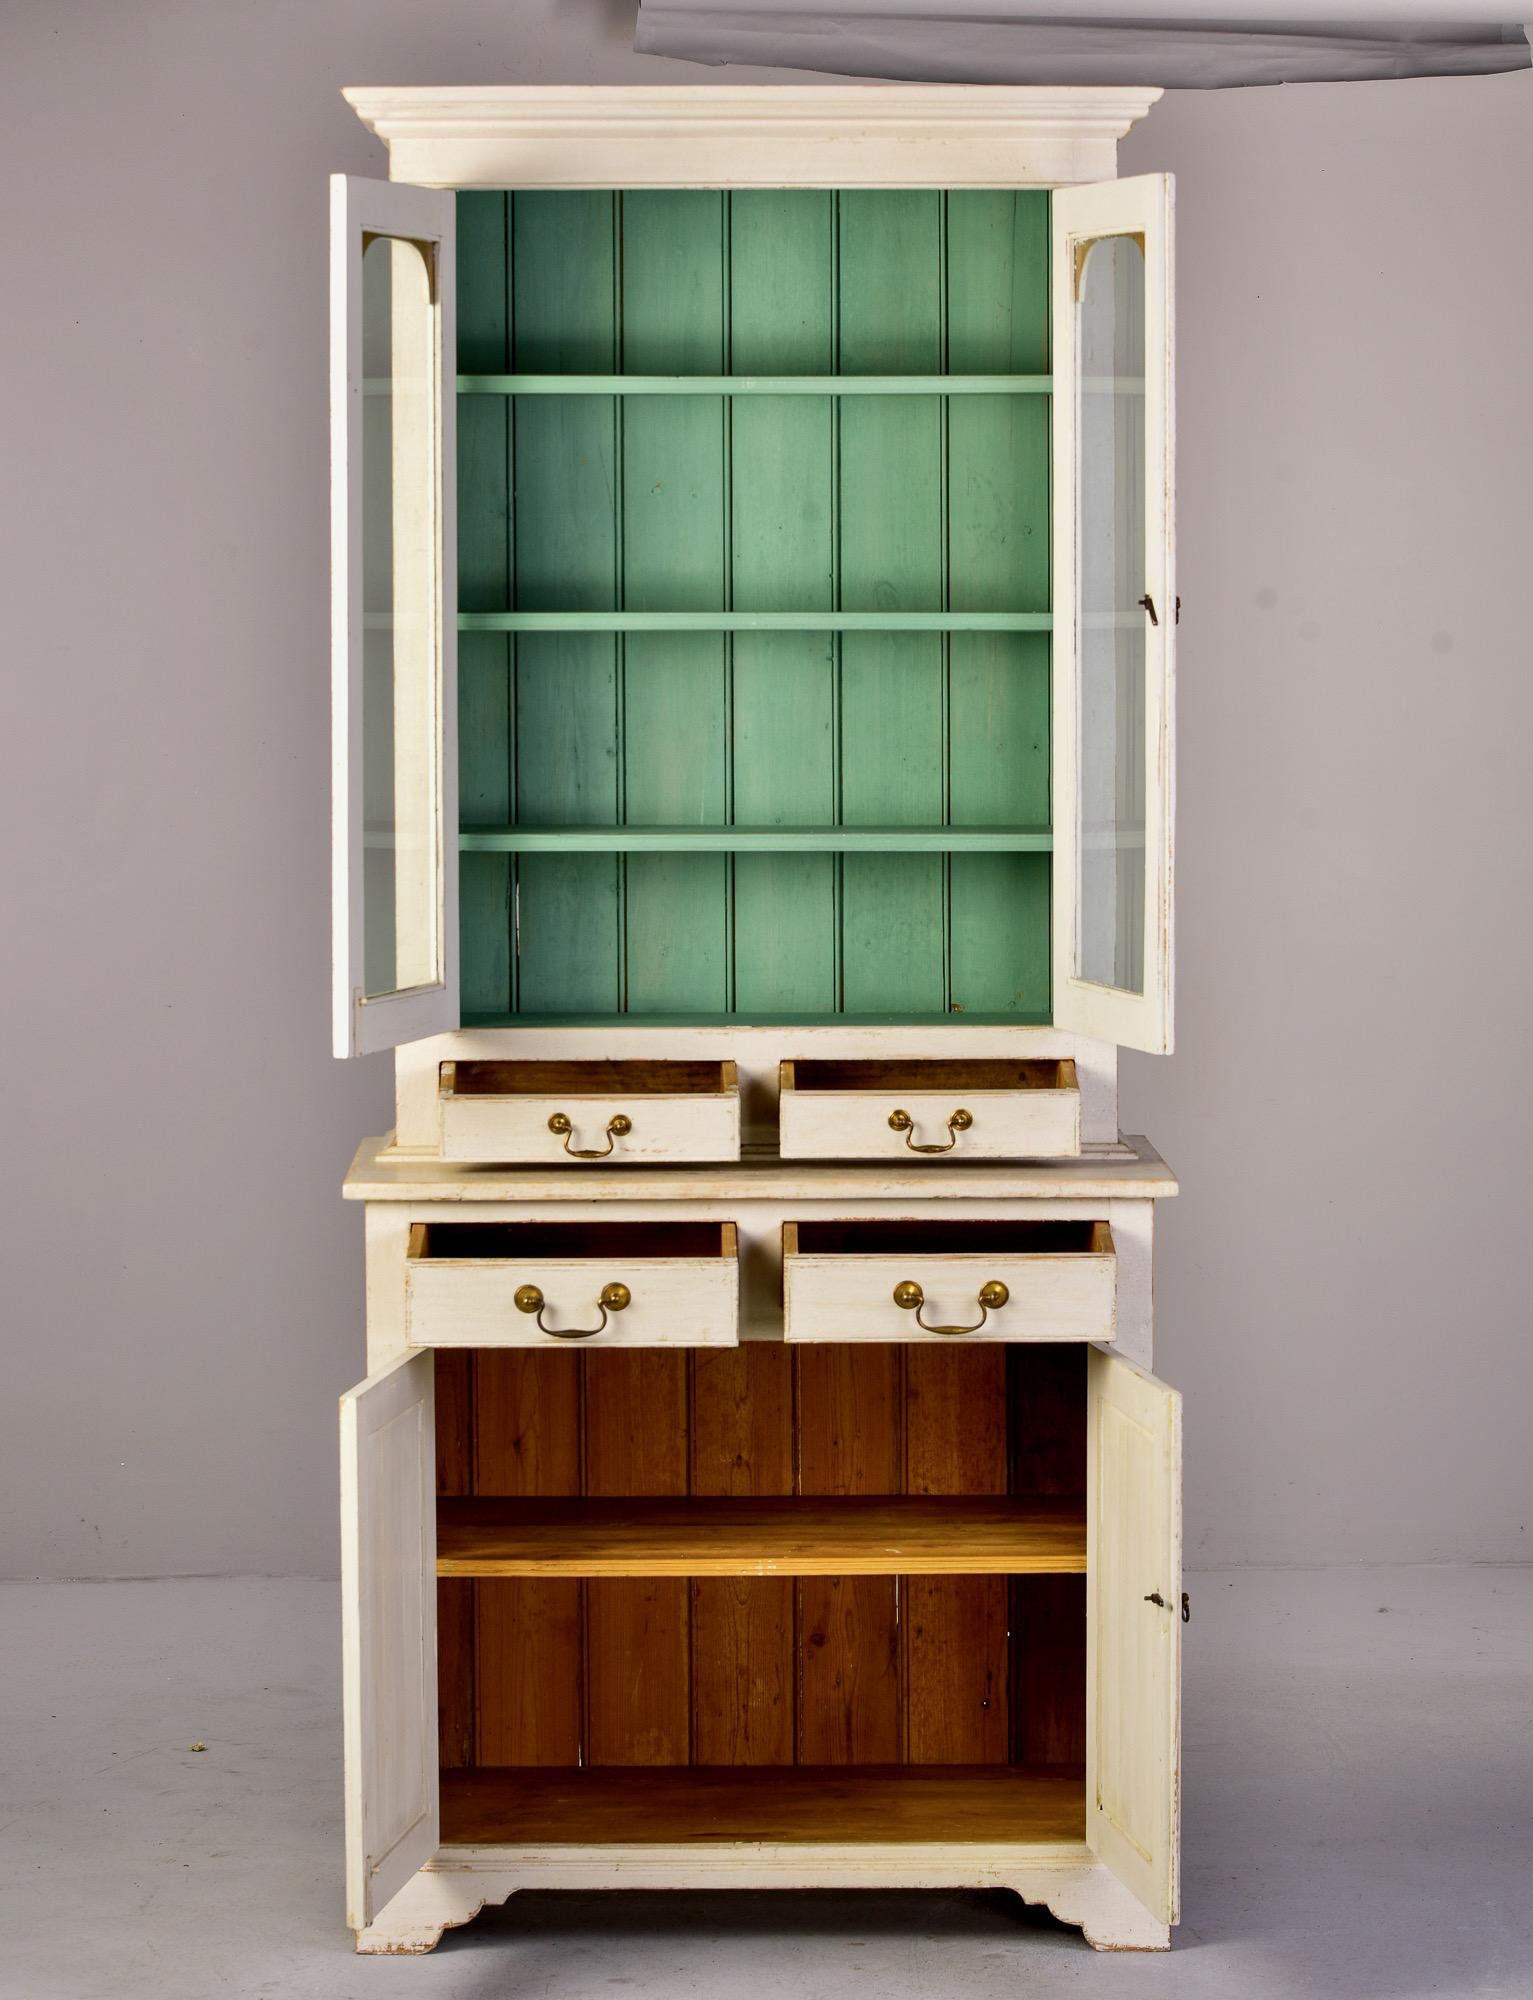 Small 19th C English Glazed Bookcase with White Paint and Blue Shelves 1